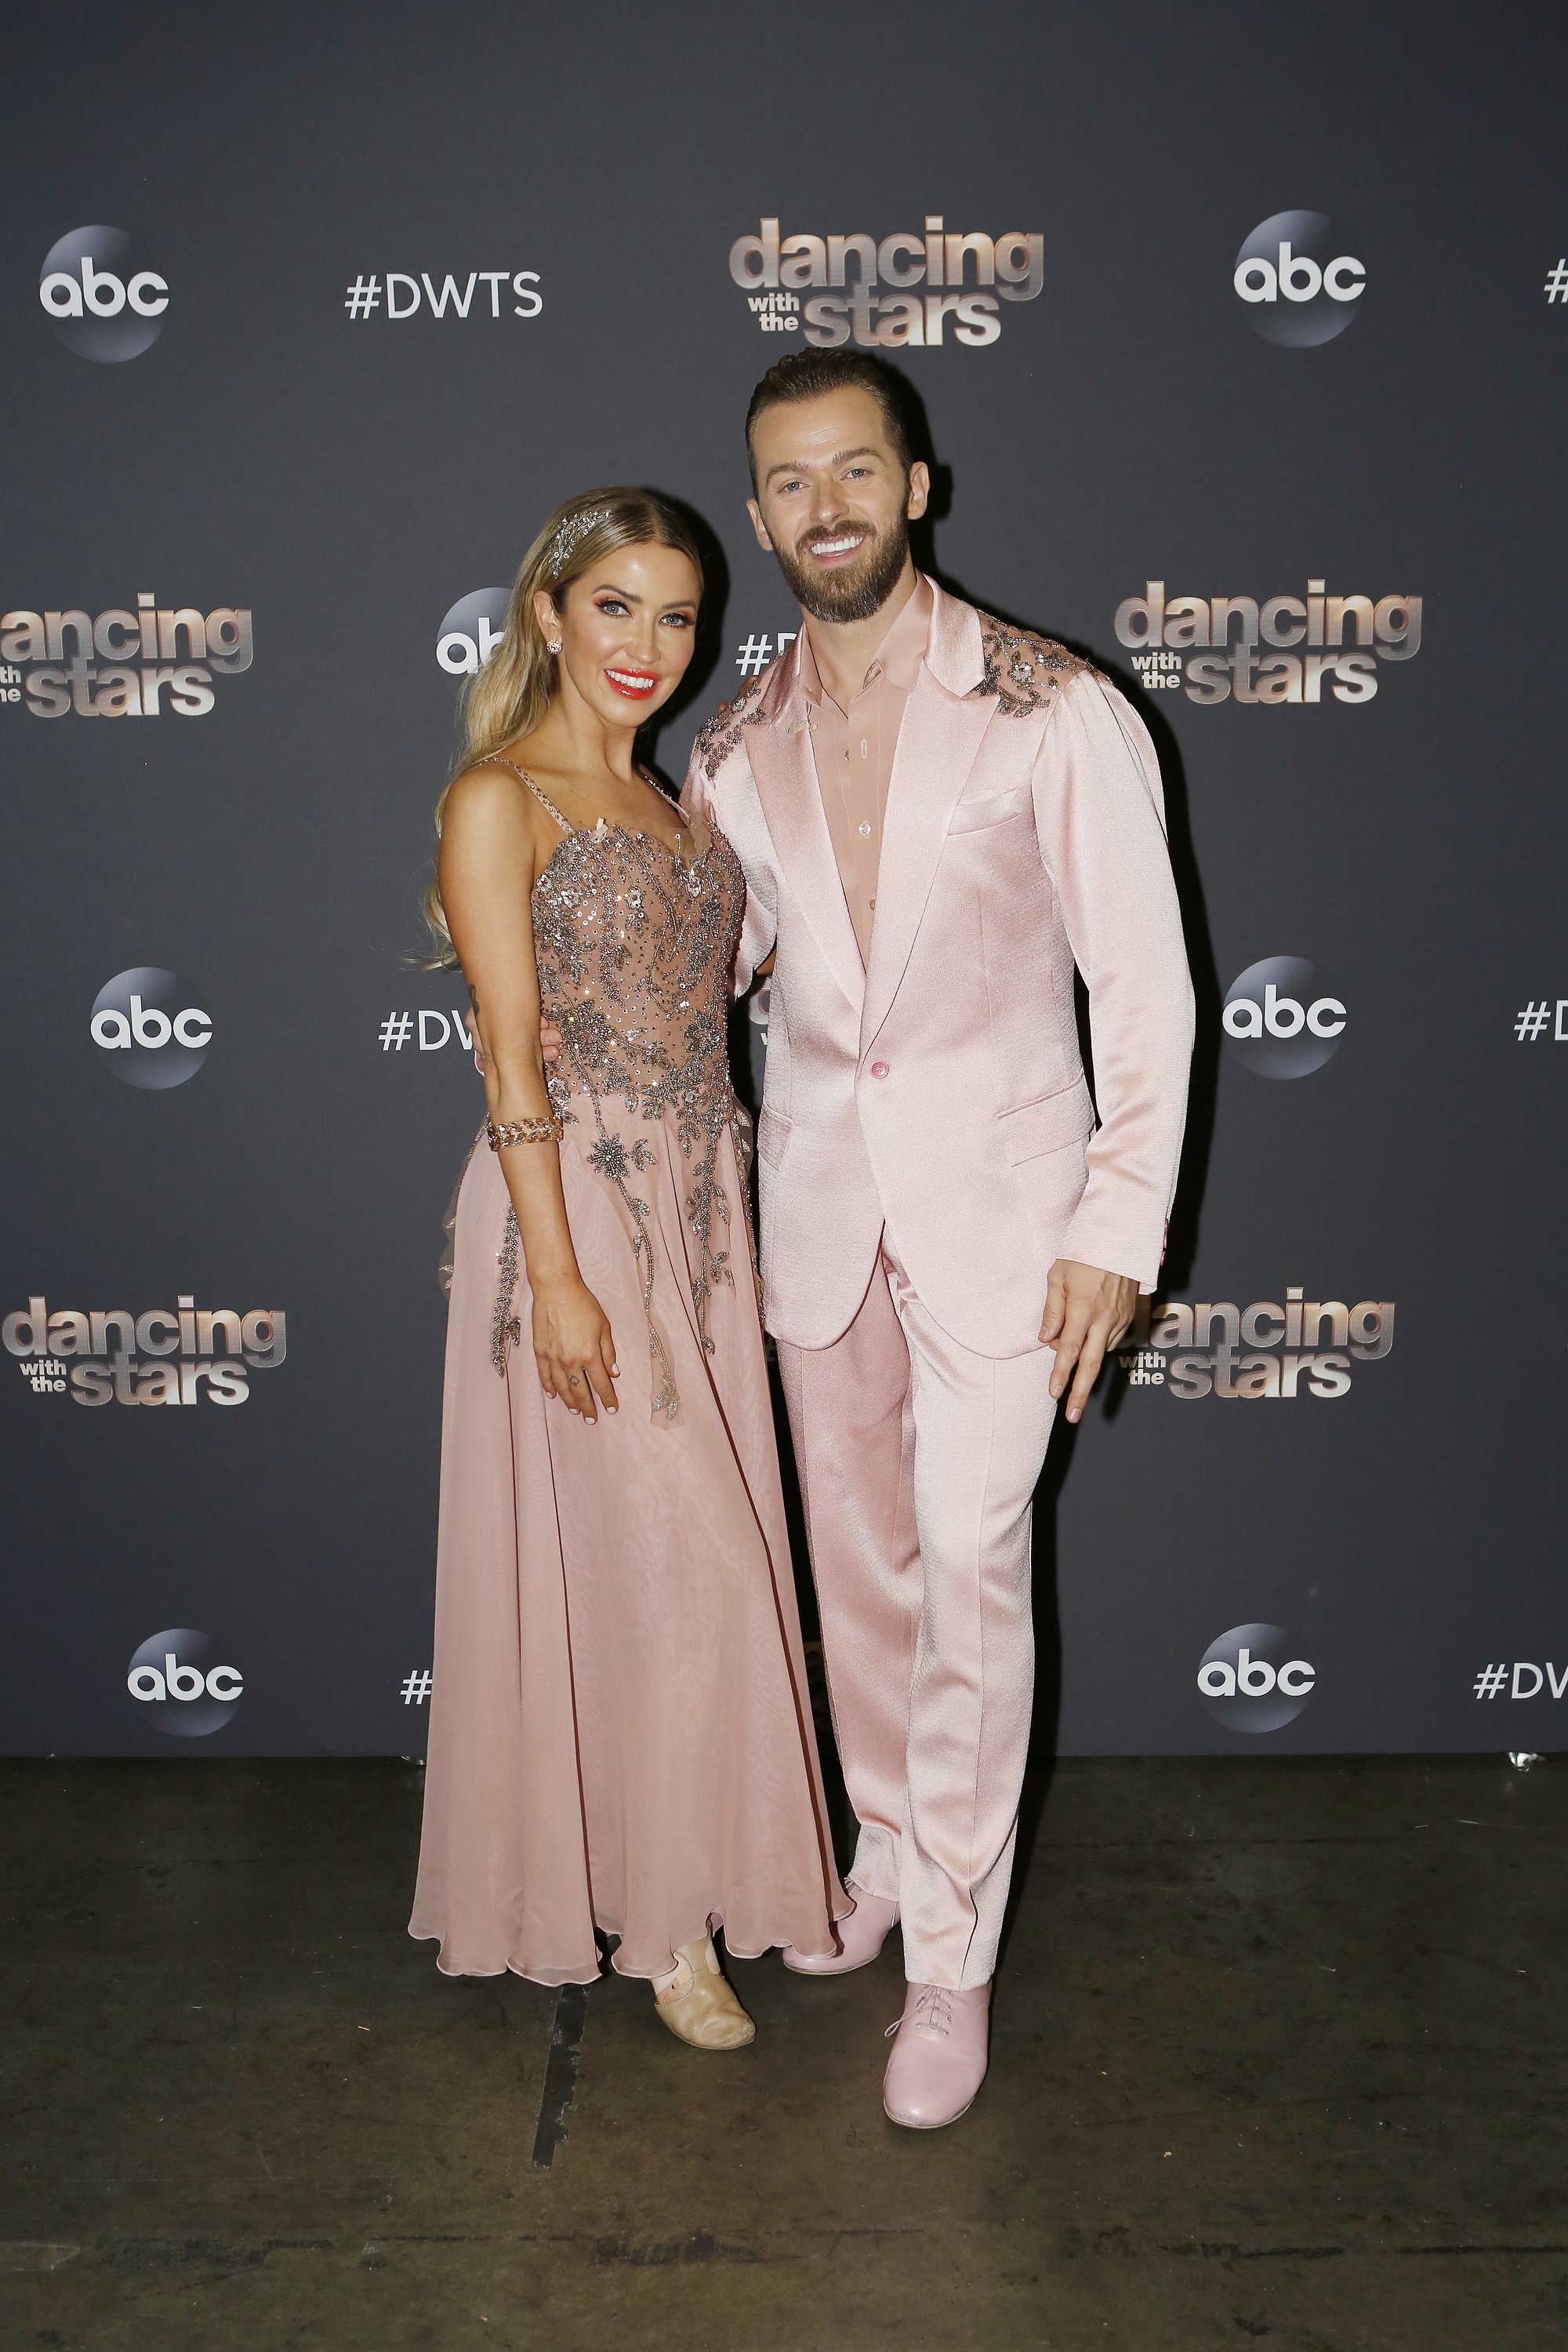 Kaitlyn Bristowe and Artem Chigvintsev pictured at "Dancing With The Stars," 2020. | Photo: Getty Images